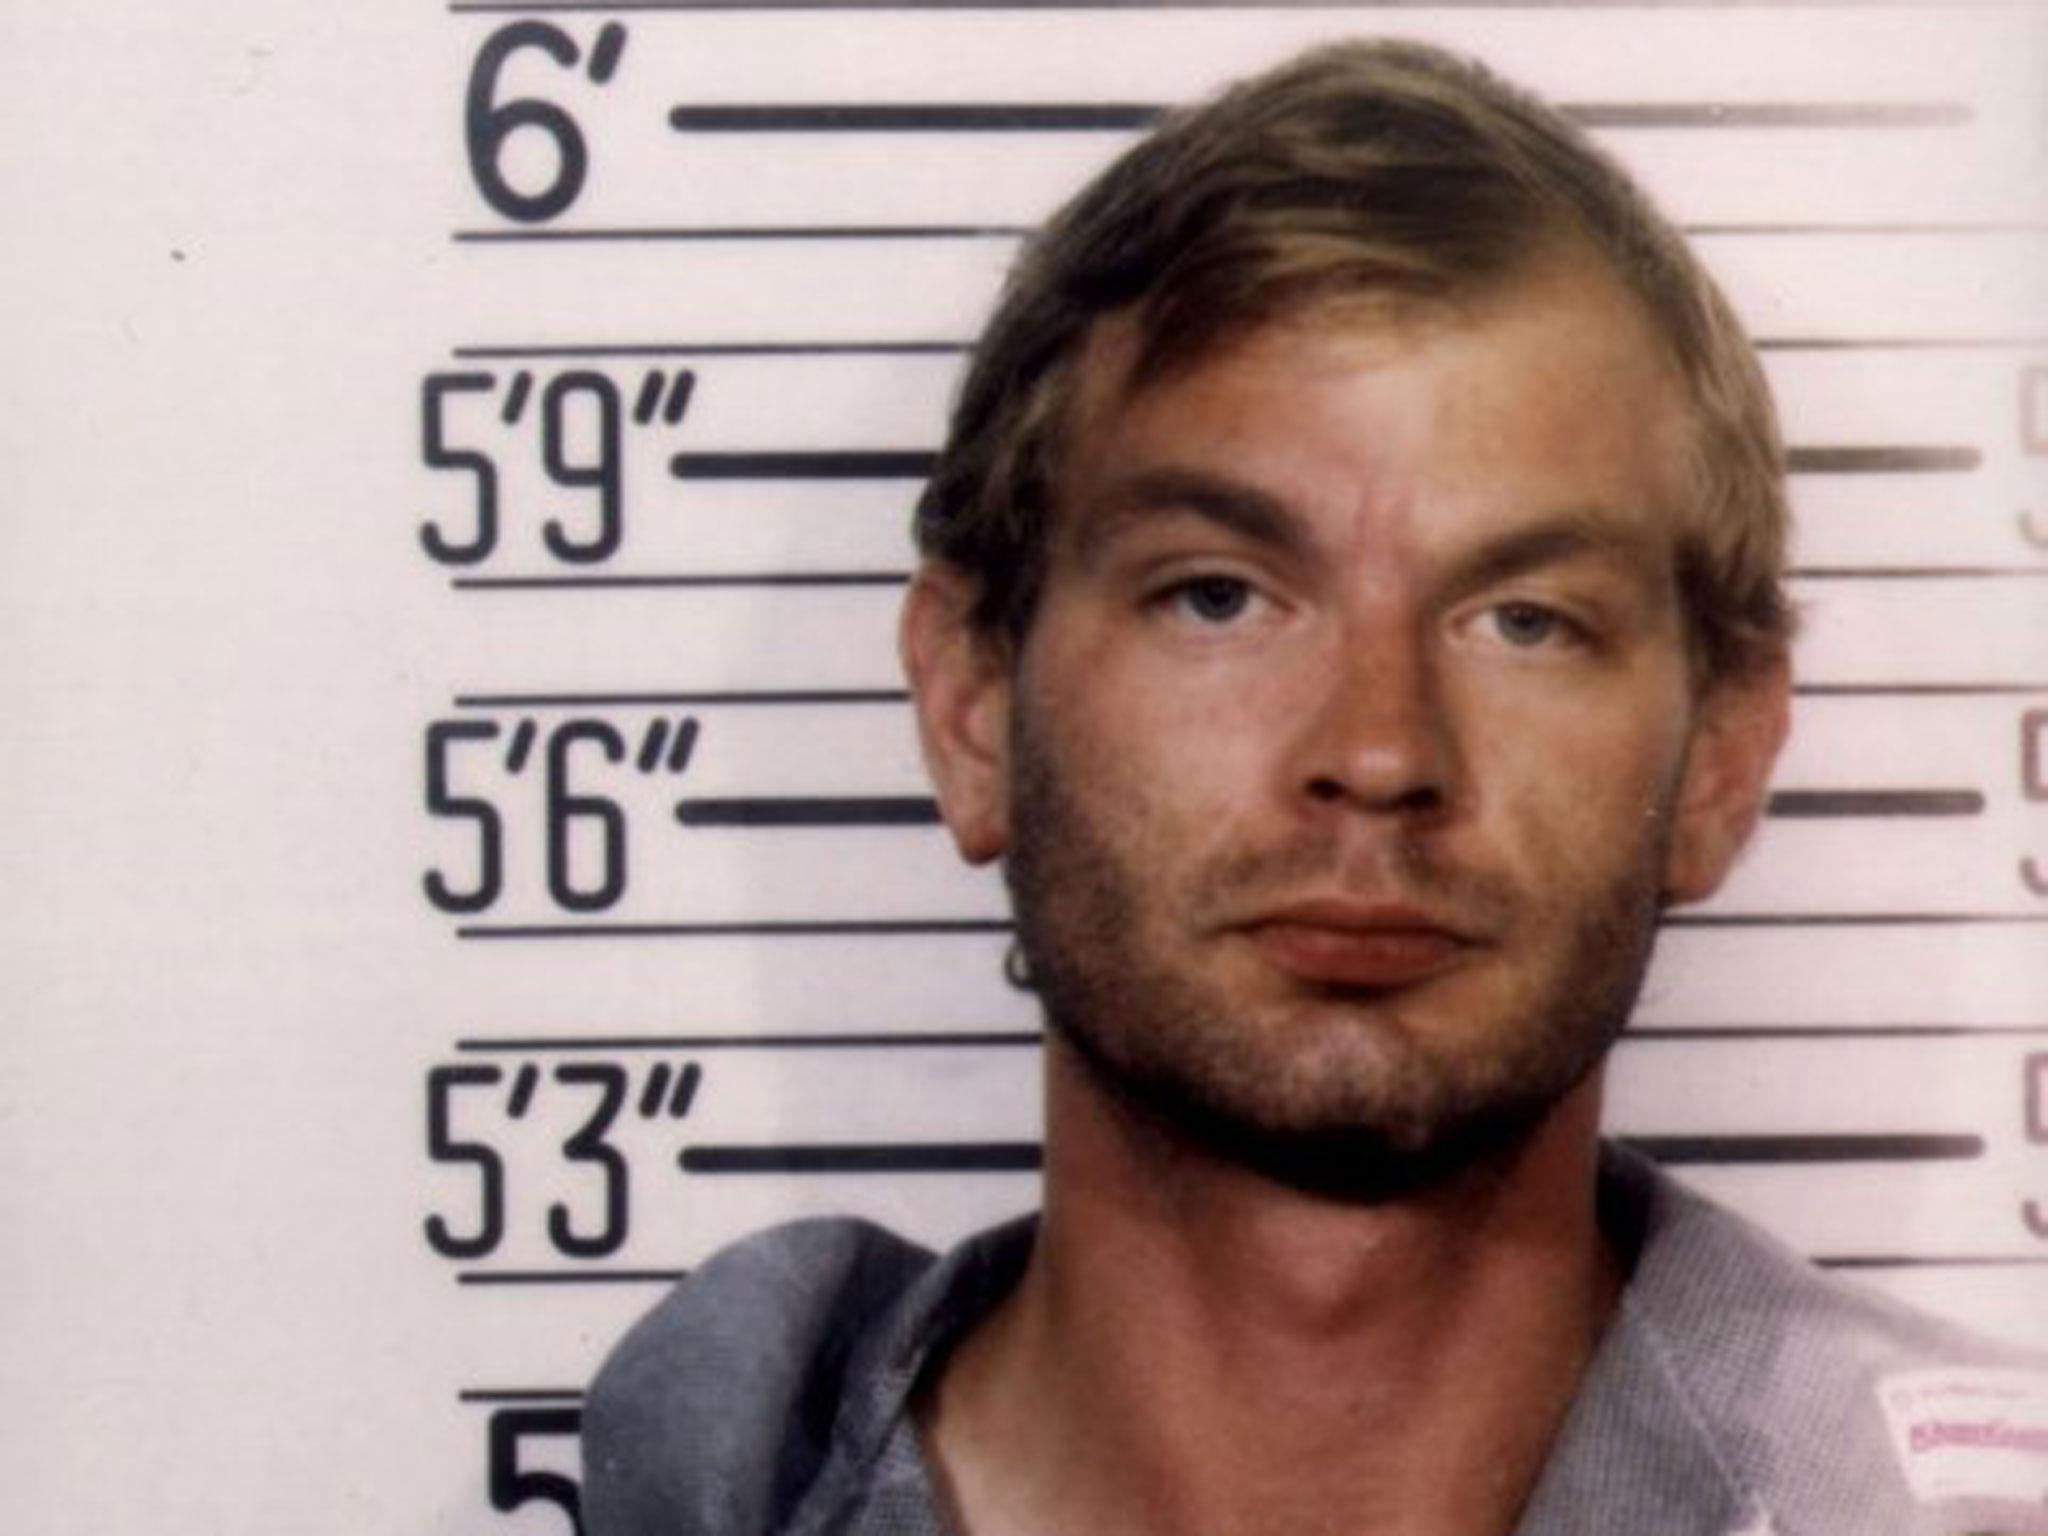 Jeffrey Dahmer was stationed at Baumholder, Germany in 1980